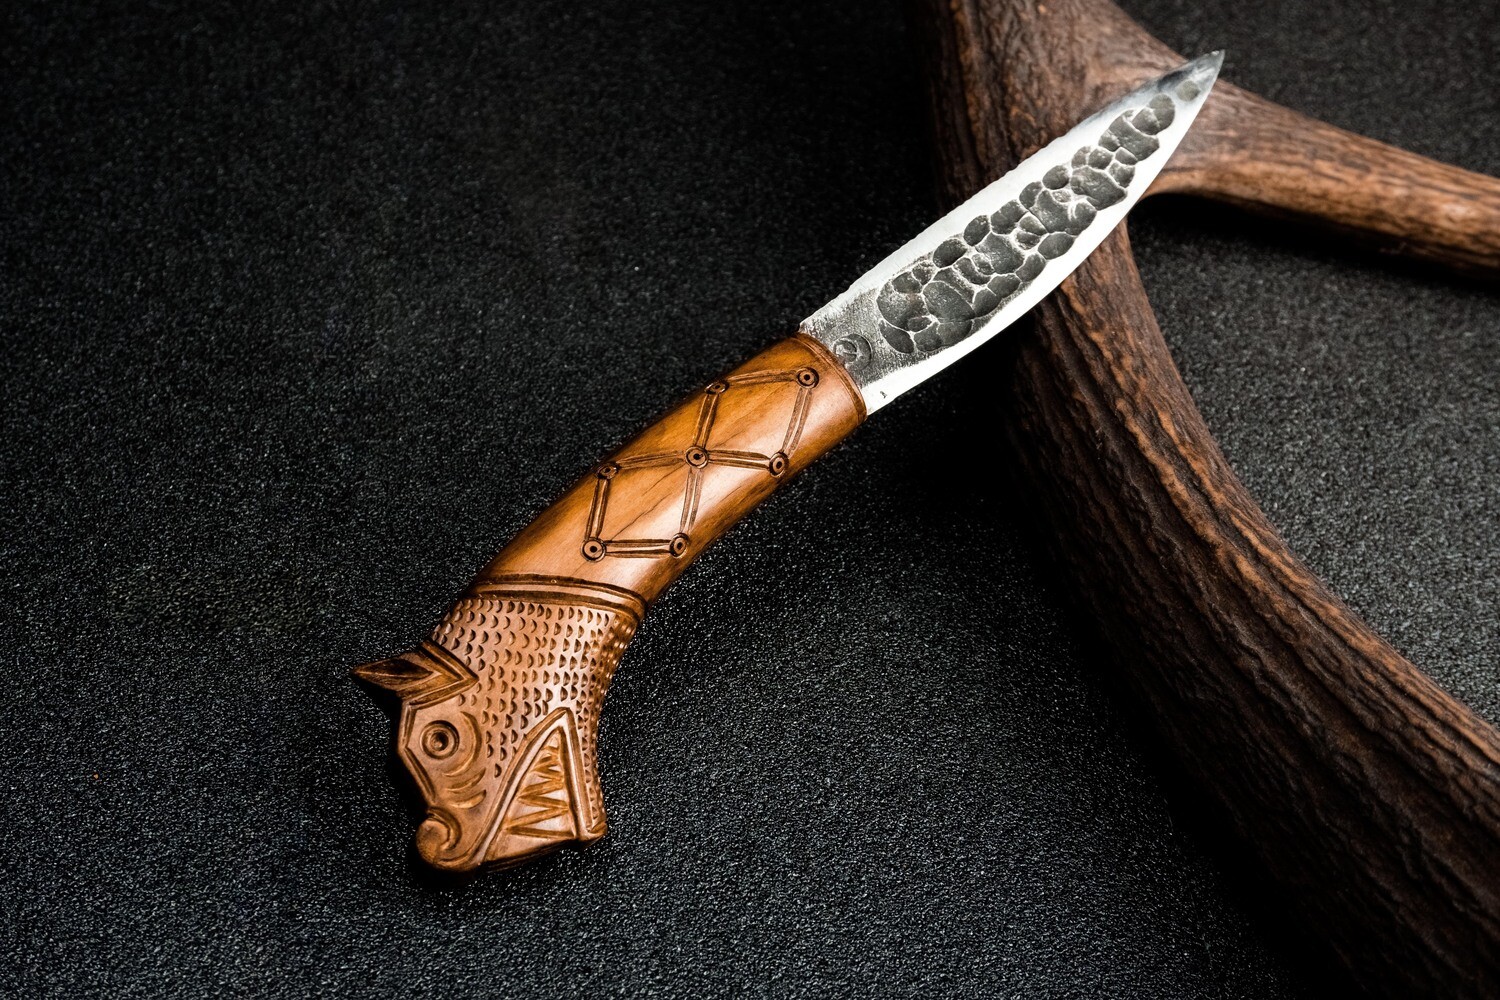 North / Yakut shape Knife with Dragon Pattern, Handforged, Antlers Carved Handle